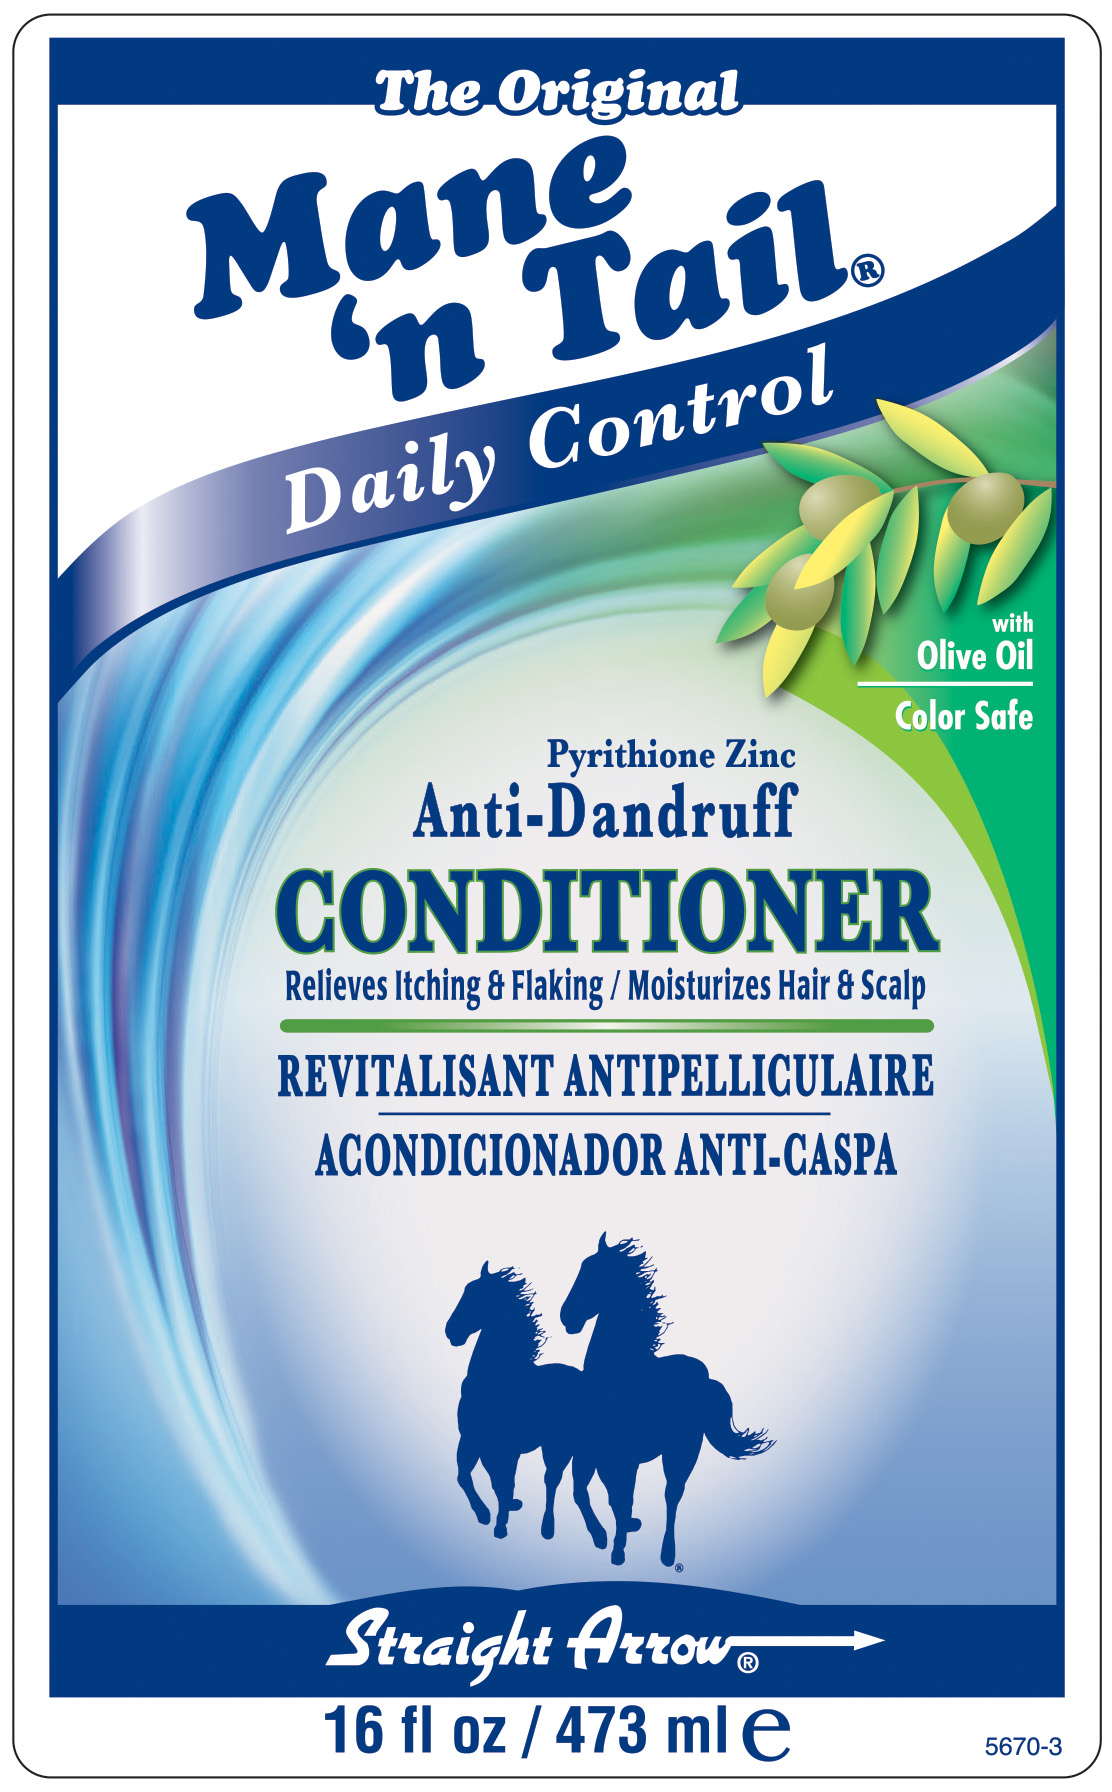 The Original Mane n Tail Daily Control Anti Dandruff Conditioner Front Label